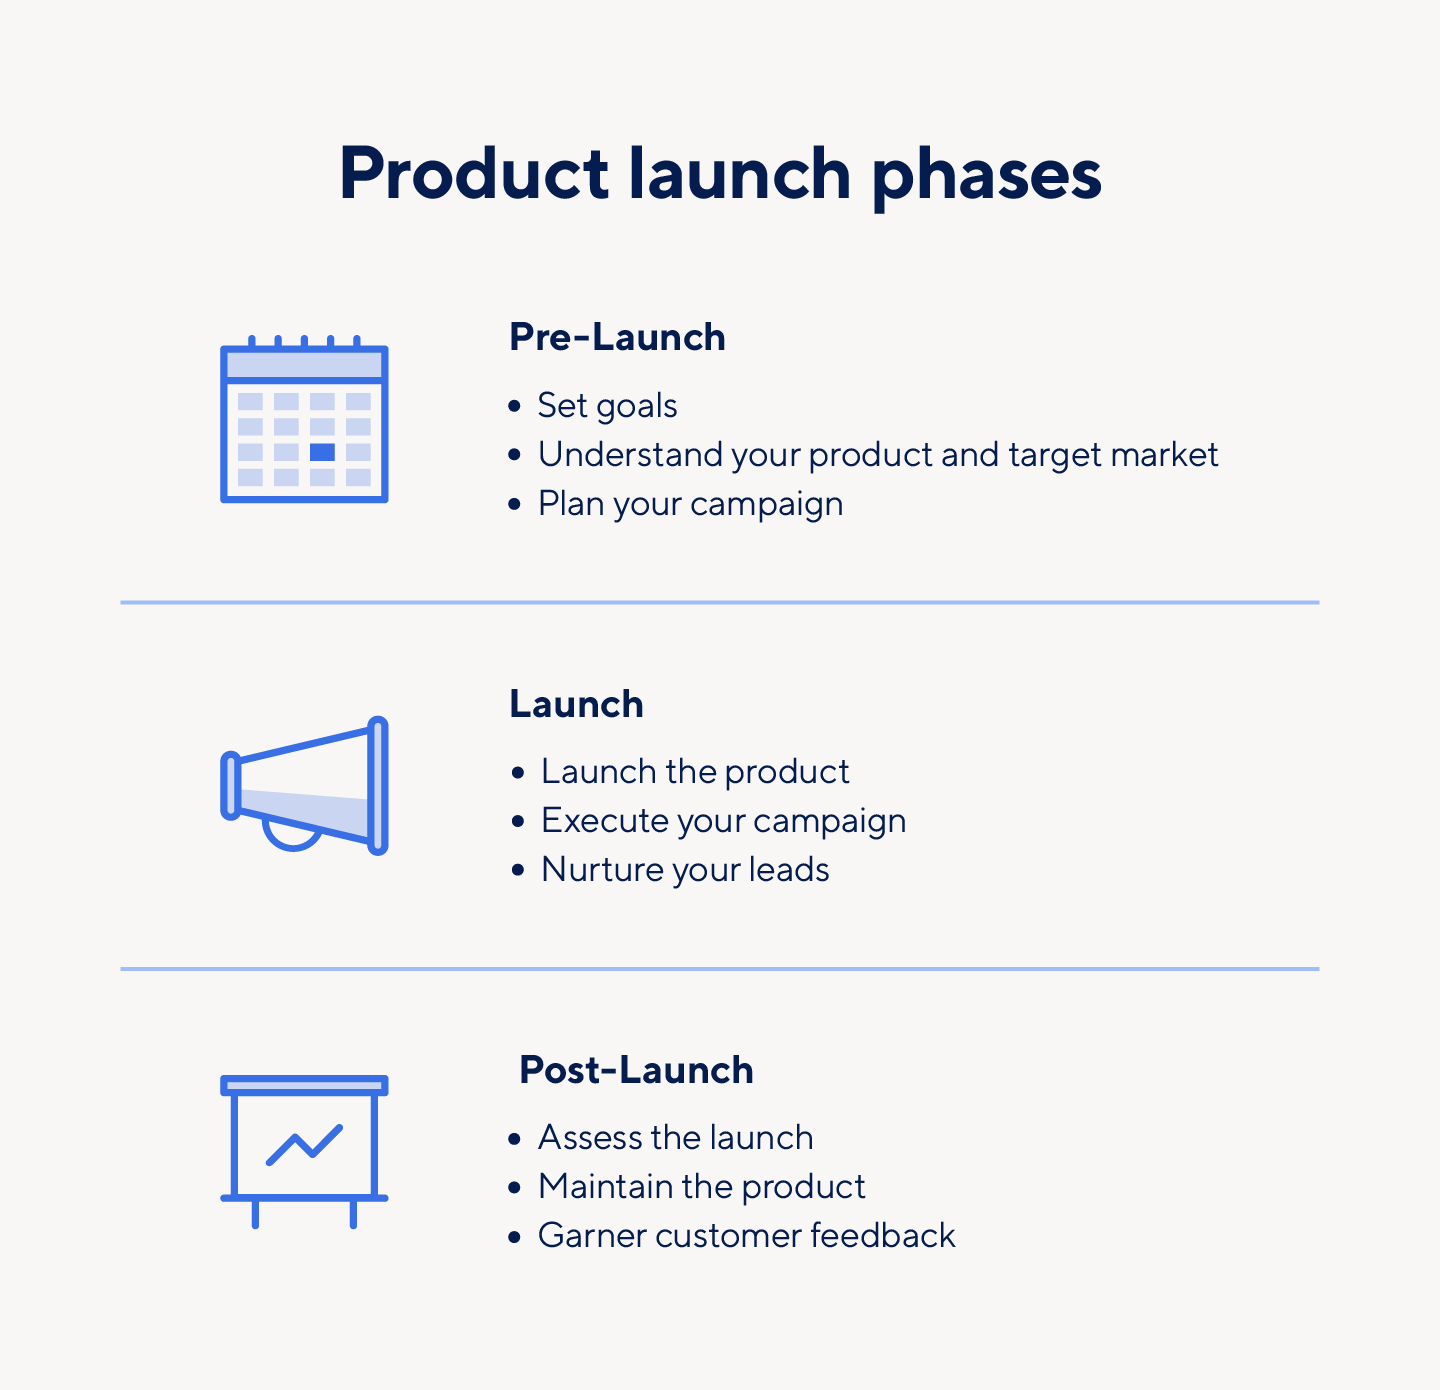 The product launch phases include pre-launch, launch, and post-launch.